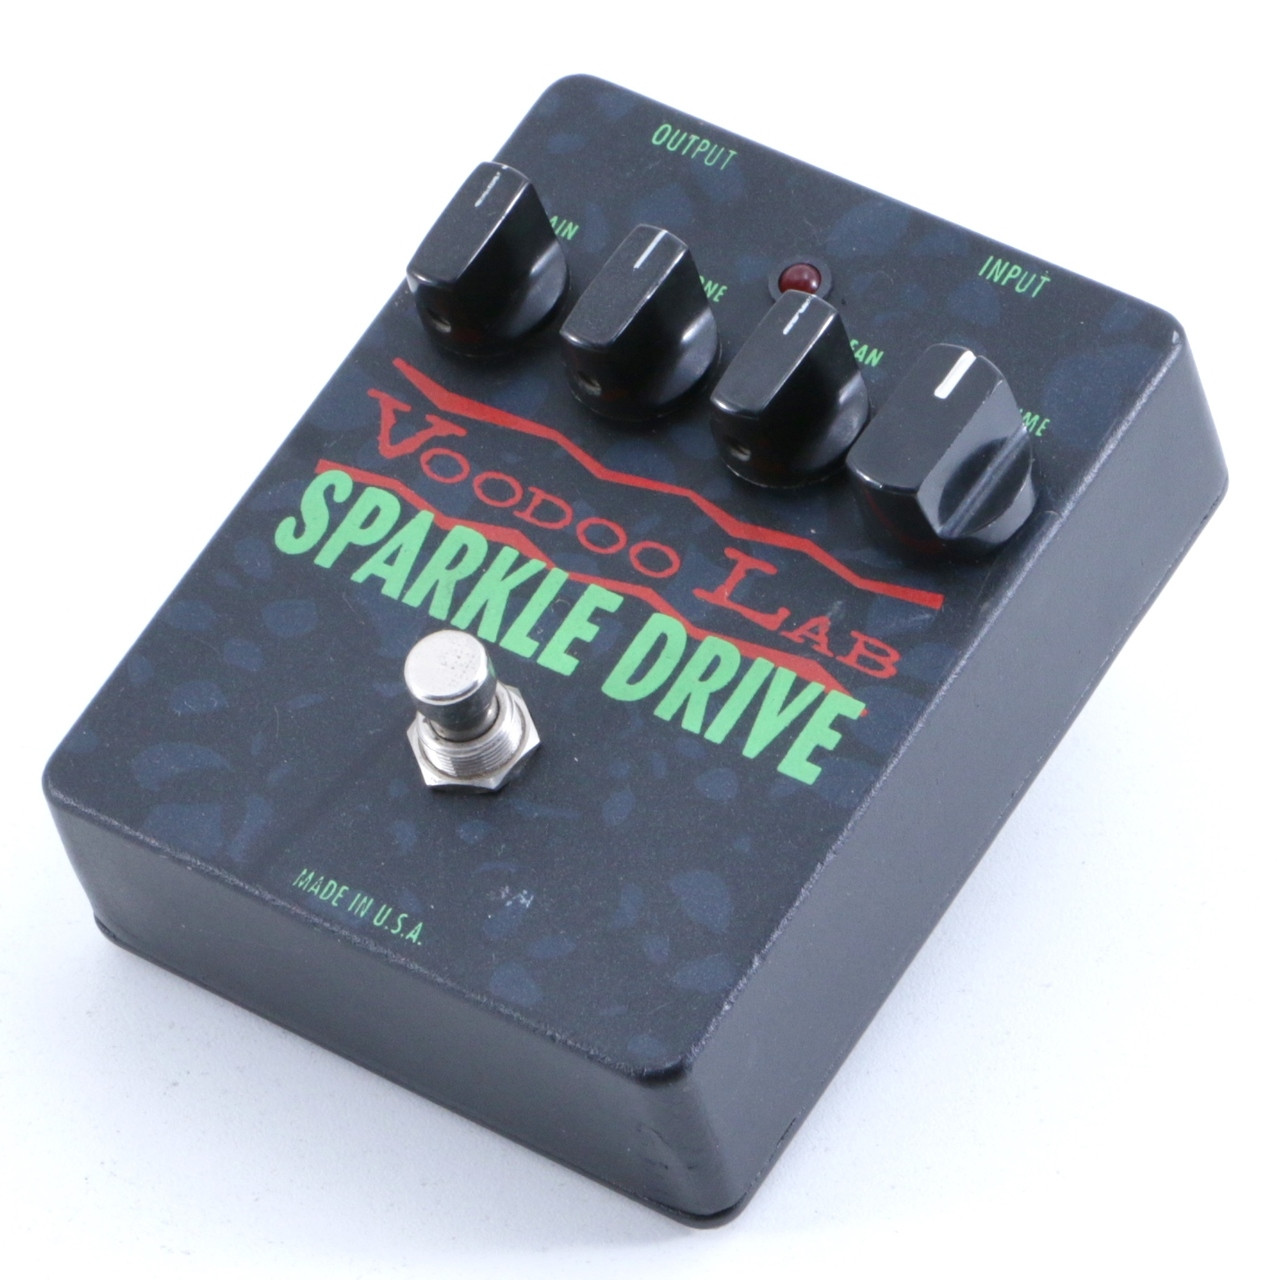 Voodoo Lab Sparkle Drive Overdrive Guitar Effects Pedal P-06117